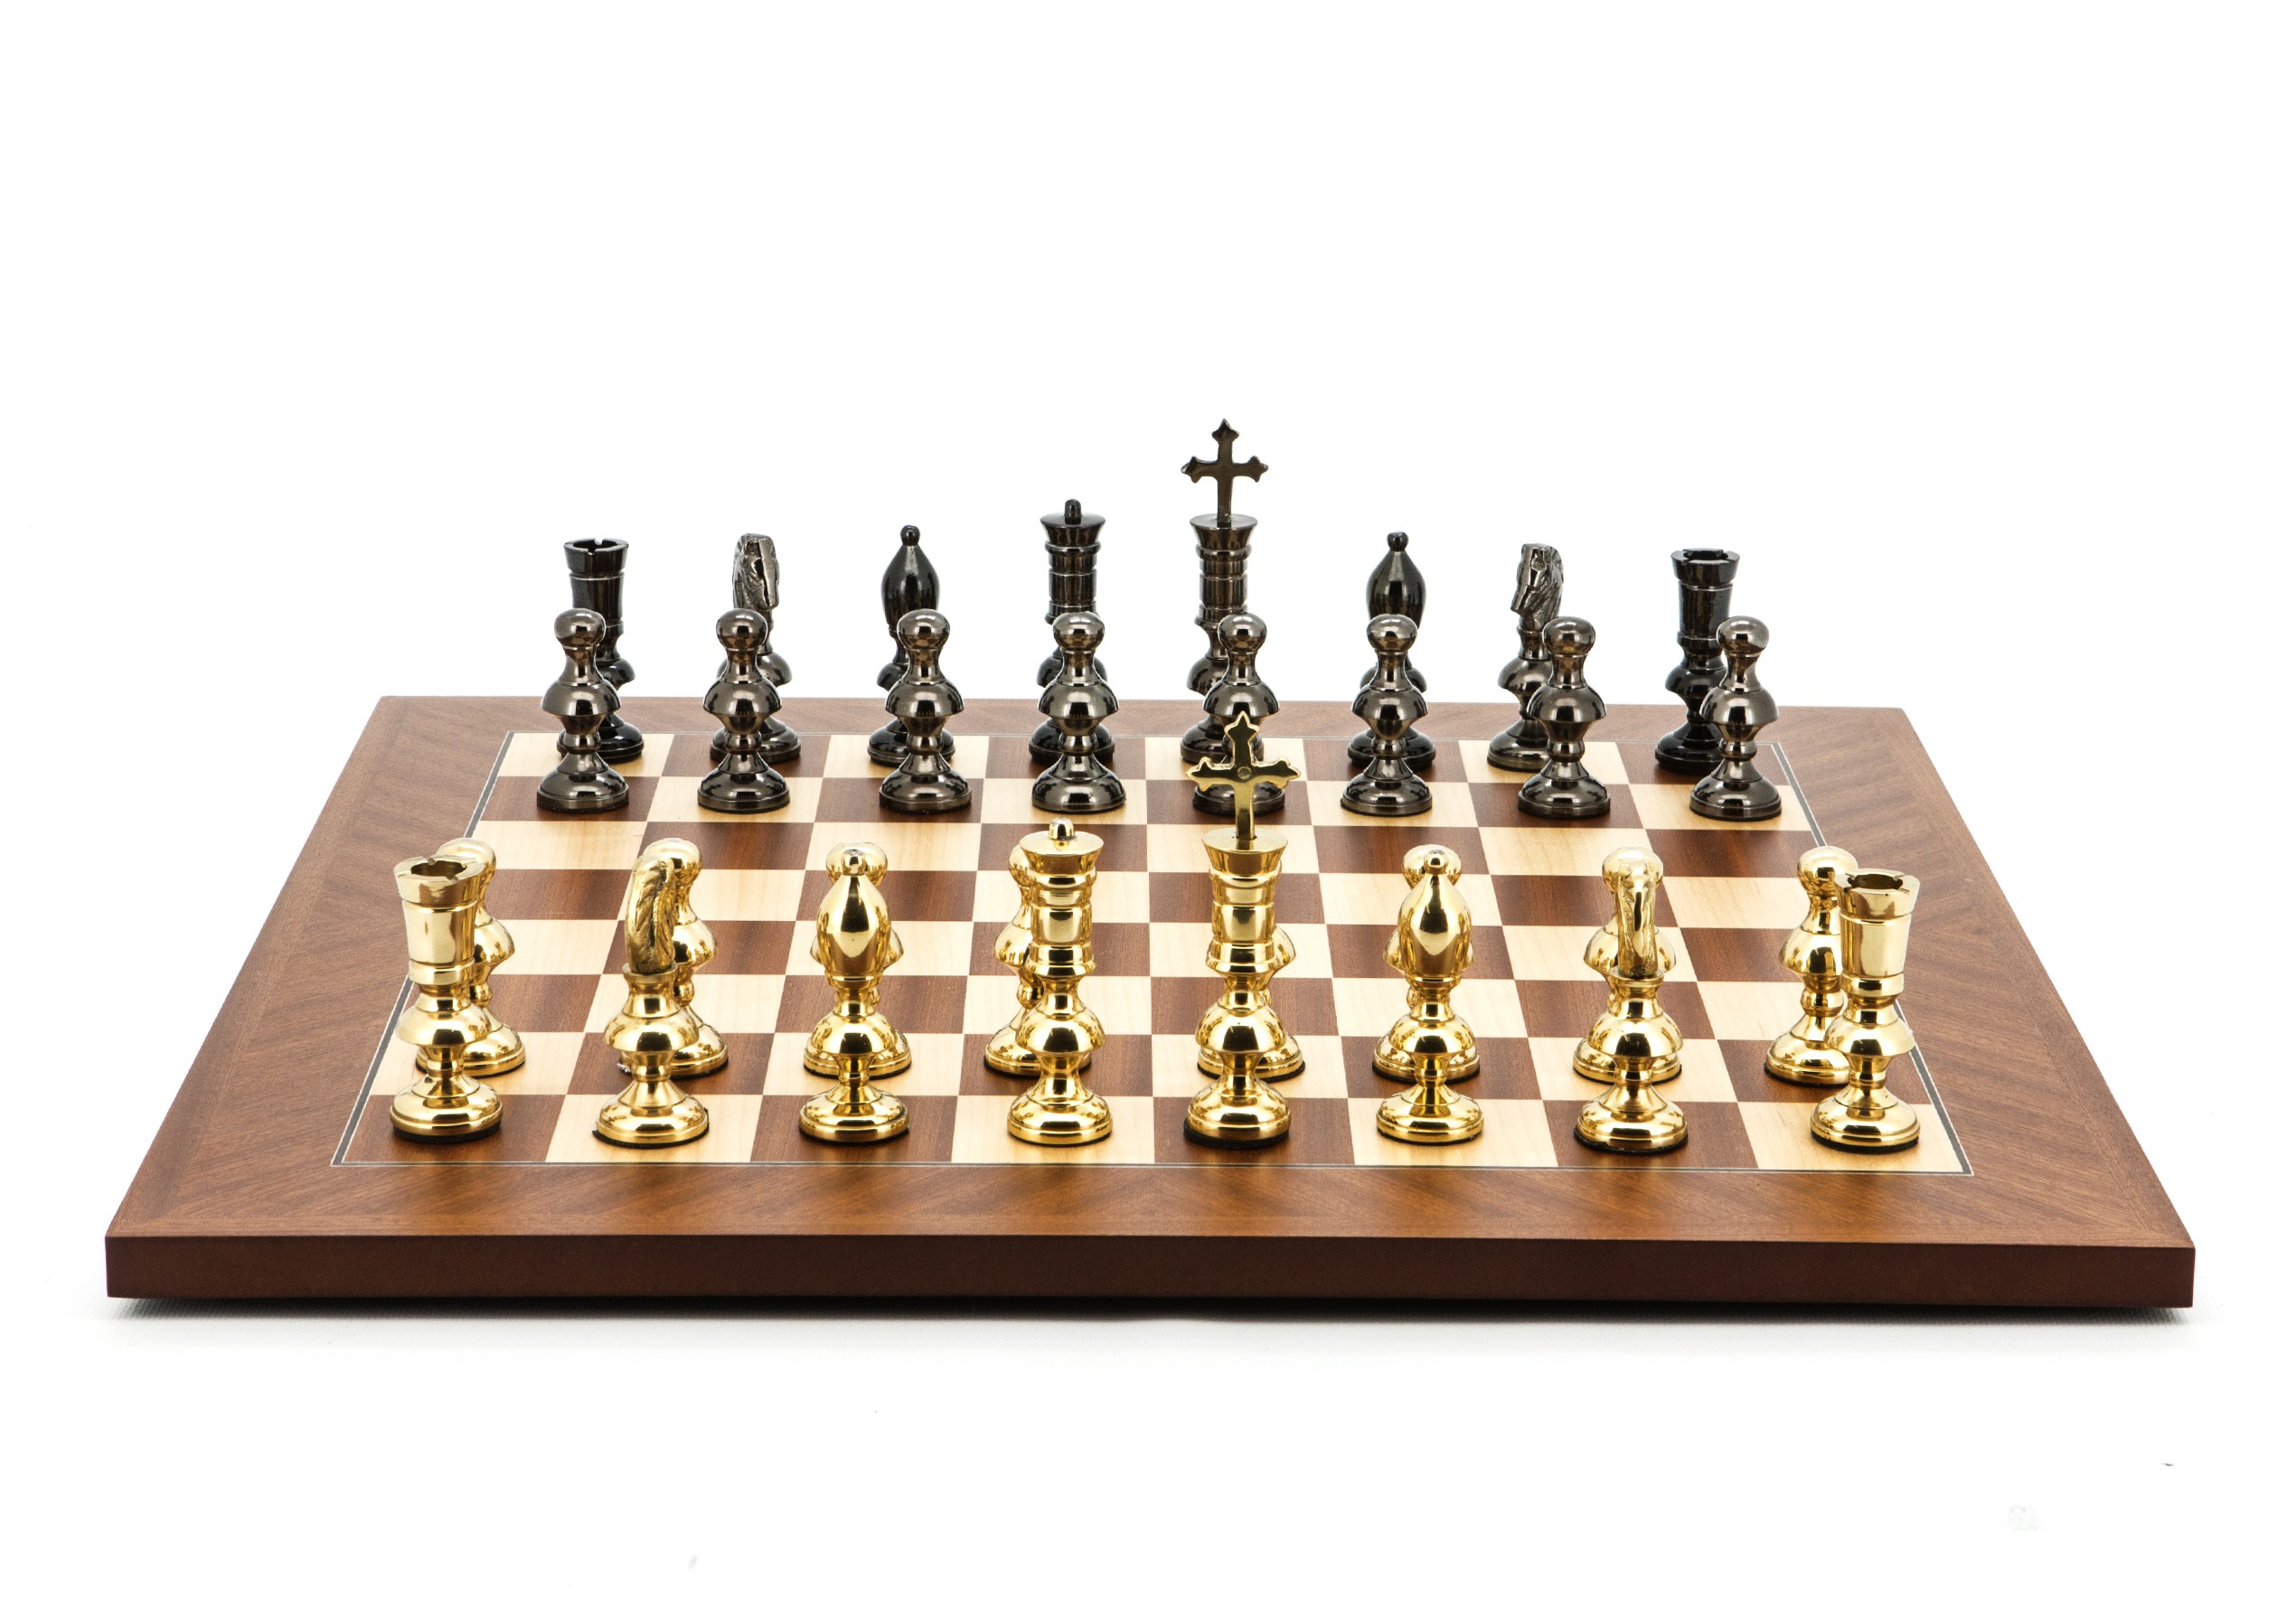 Dal Rossi Italy Chess Set Mahogany Maple Flat Board 50cm, With Metal Dark Titanium and Gold Chessmen 110mm